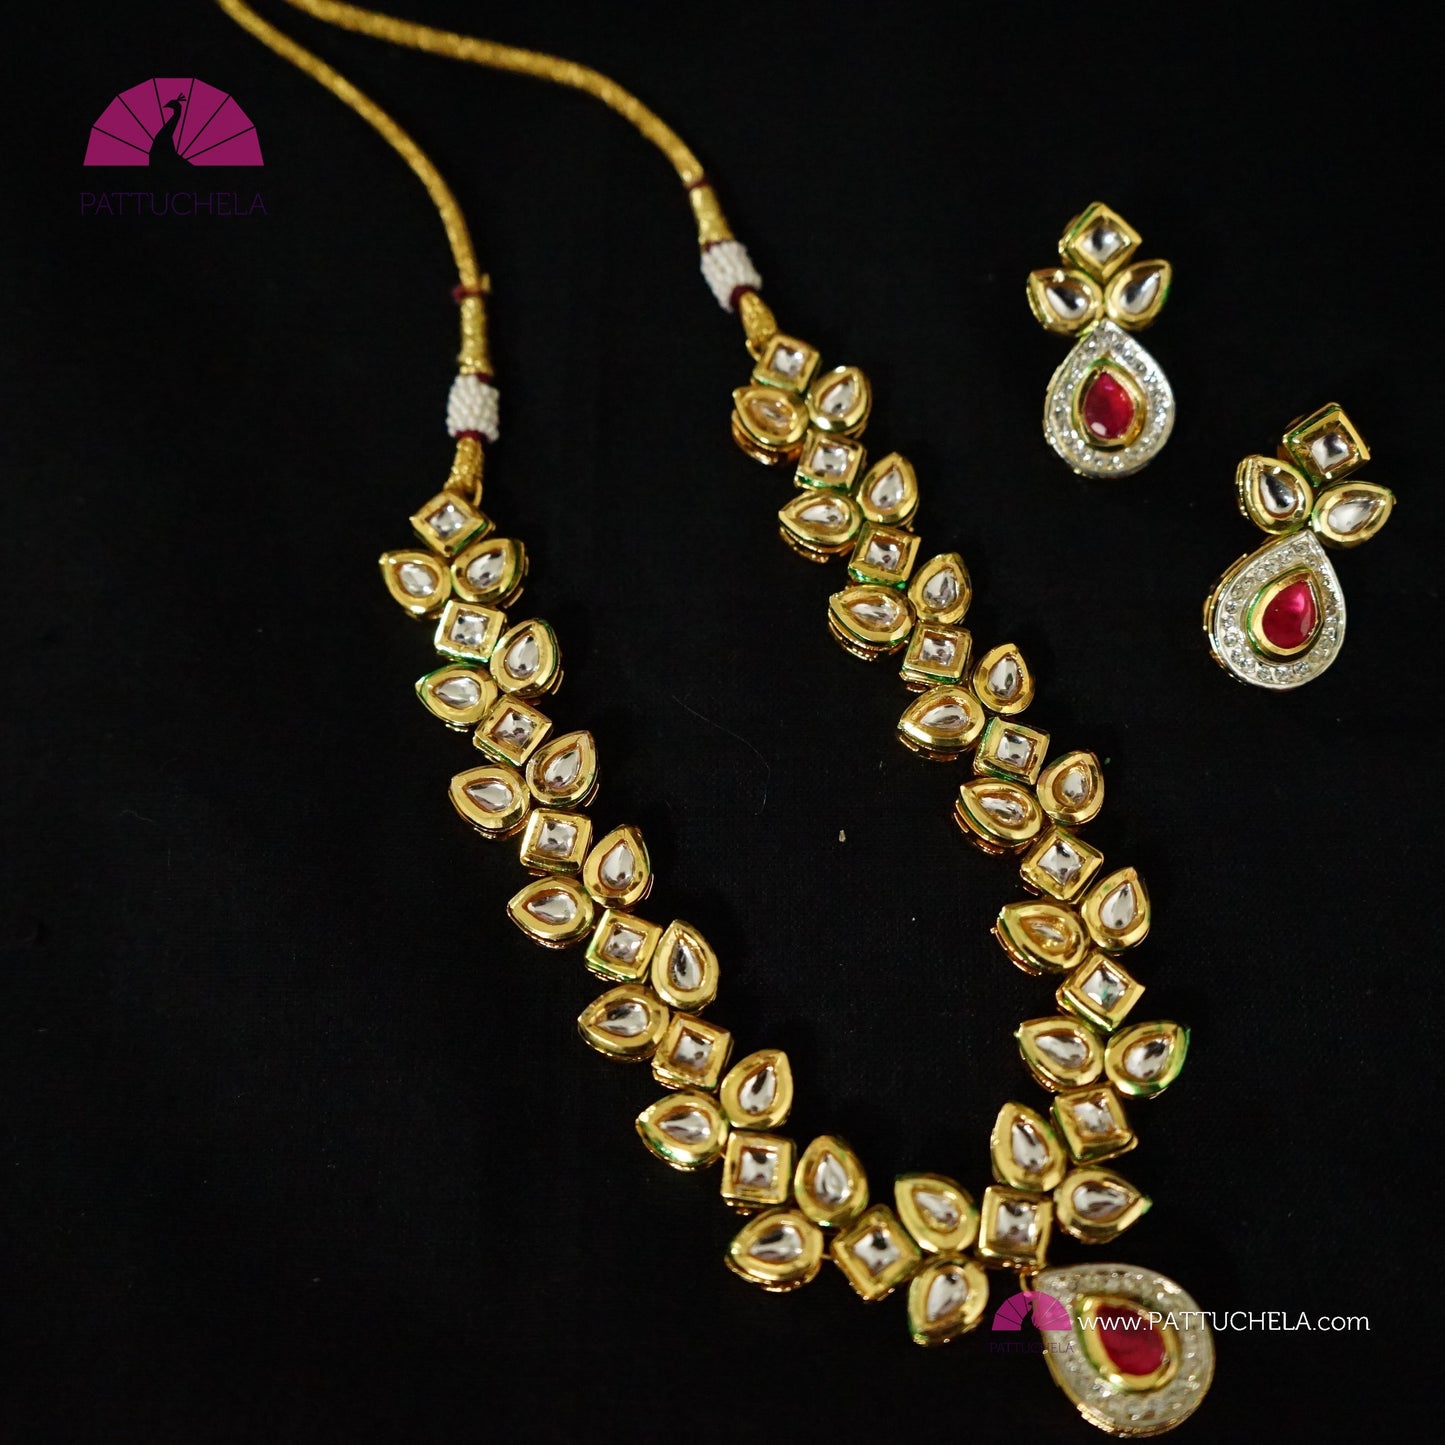 White Kundan Necklace Set with Red Cut Stones and Earrings | Fancy Jewelry | Indian Jewelry